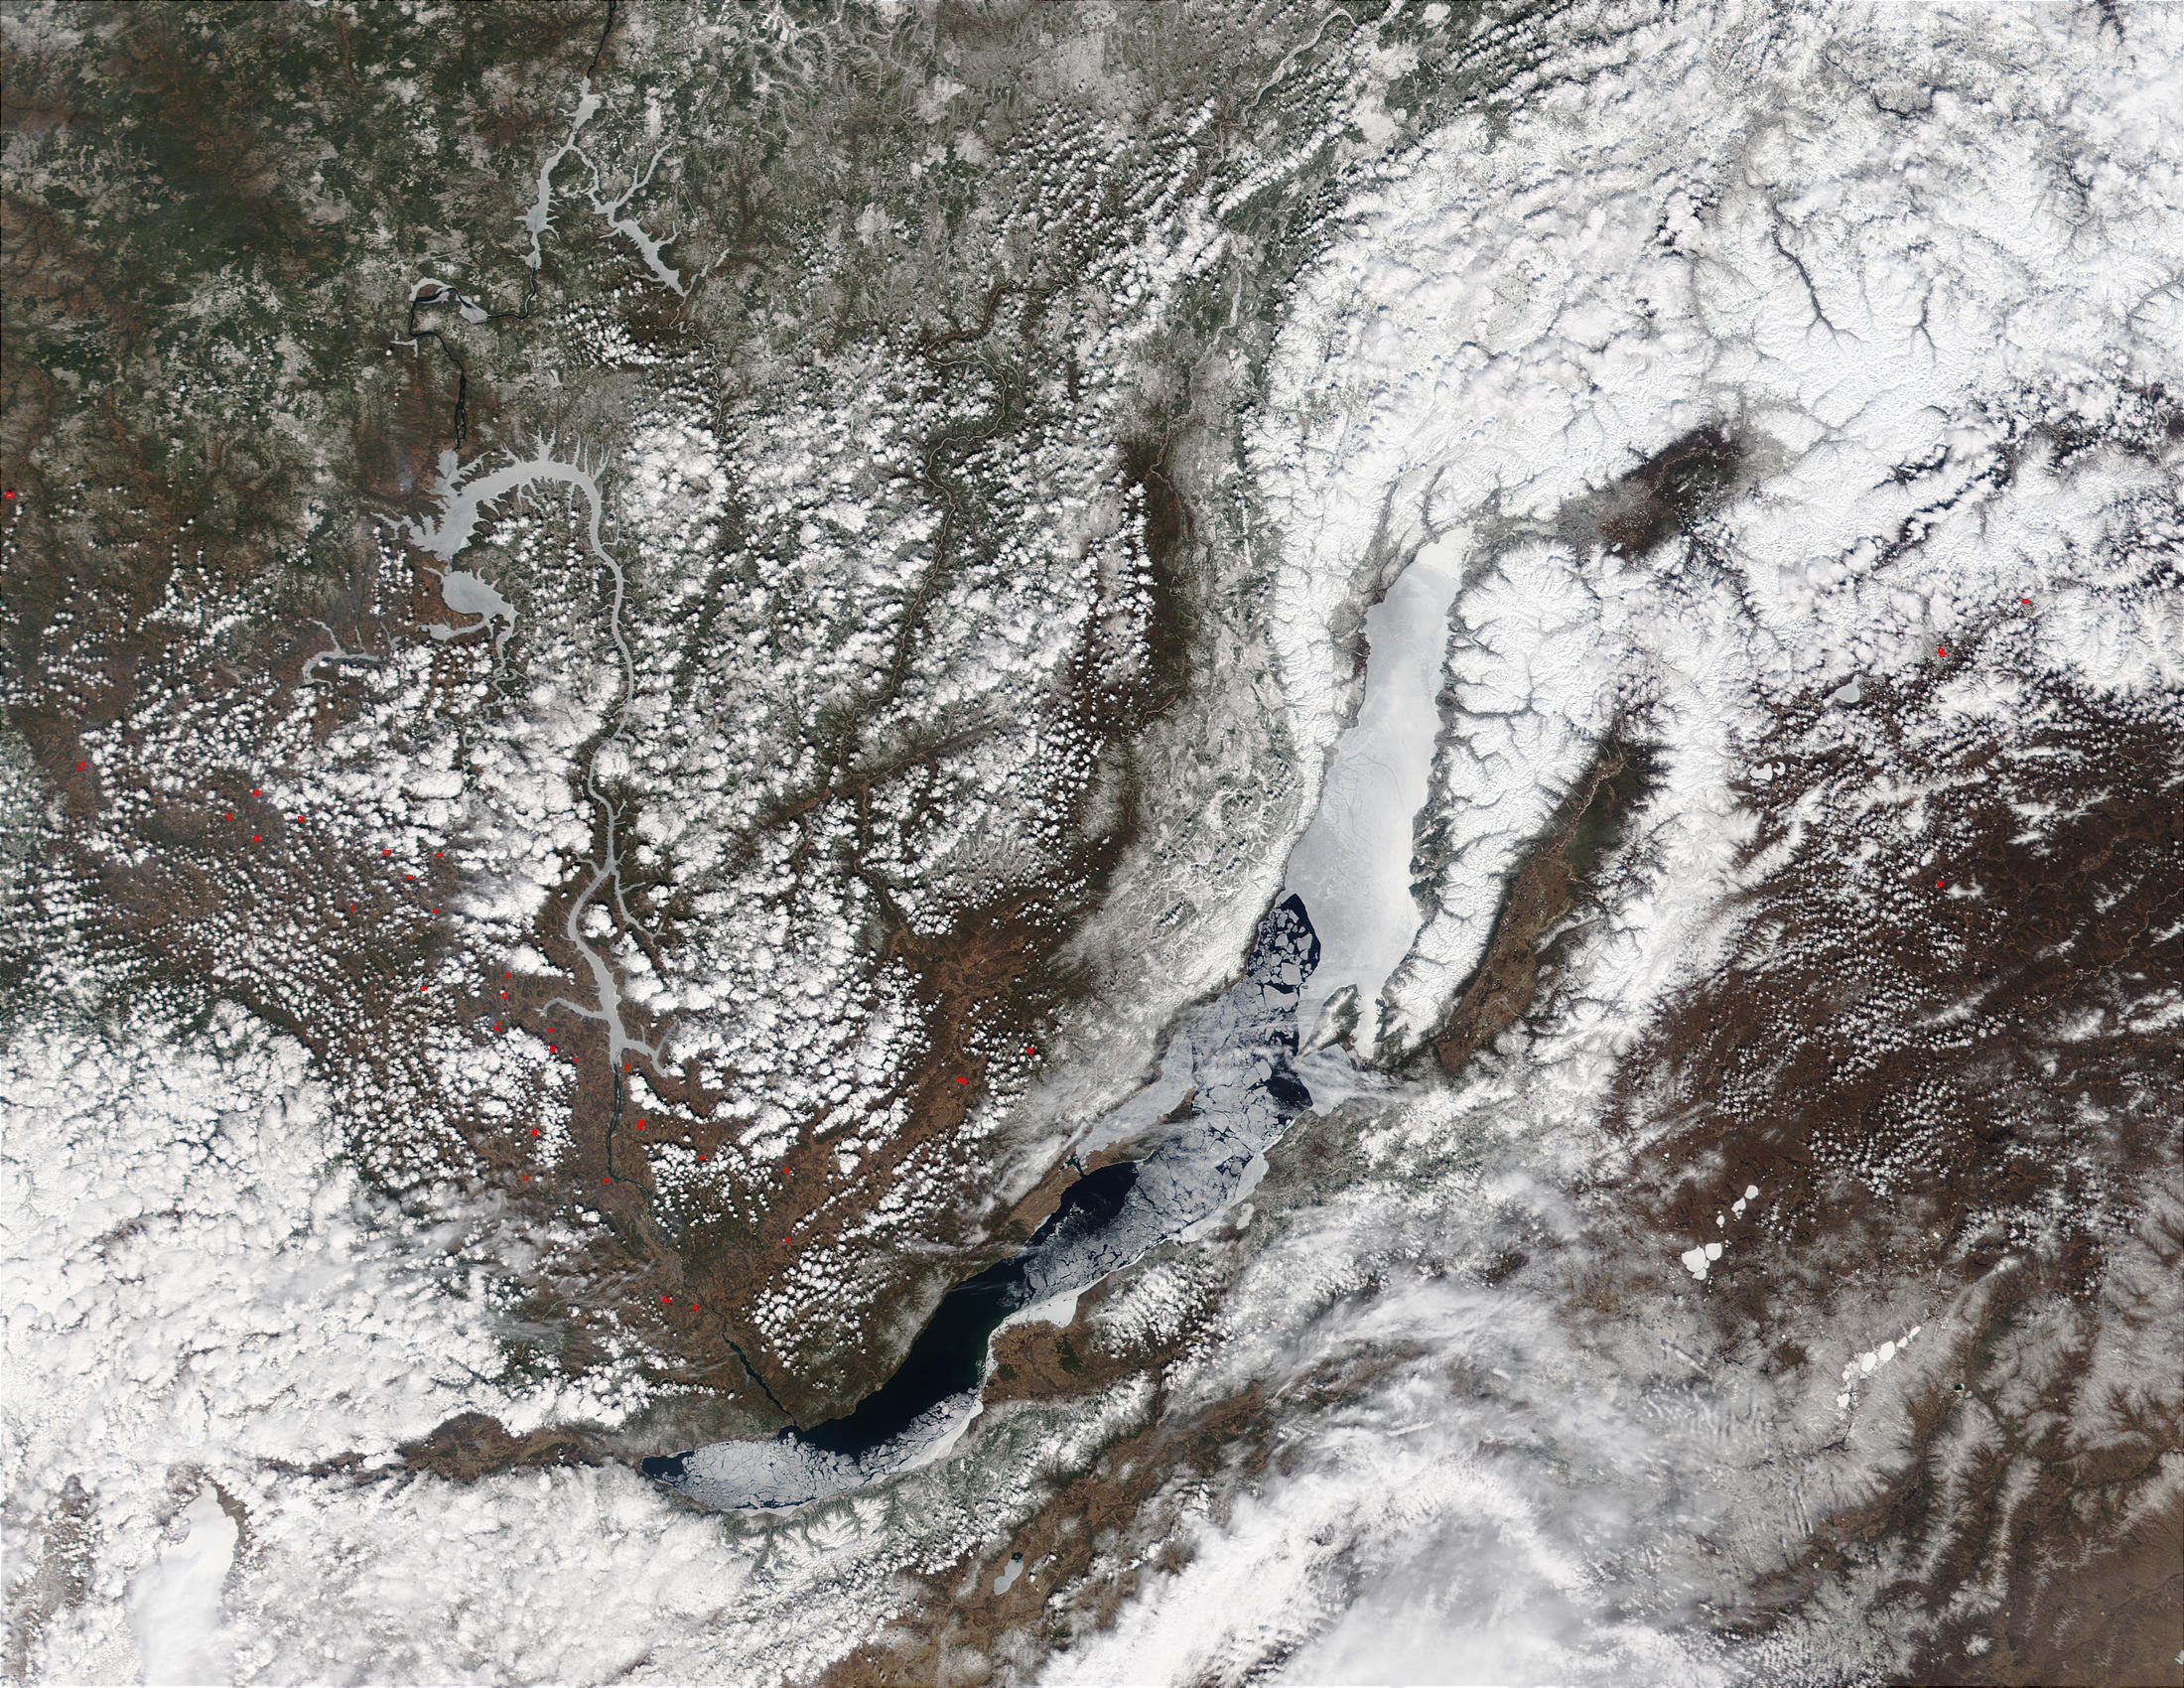 Fires Near Lake Baikal, Russia - related image preview